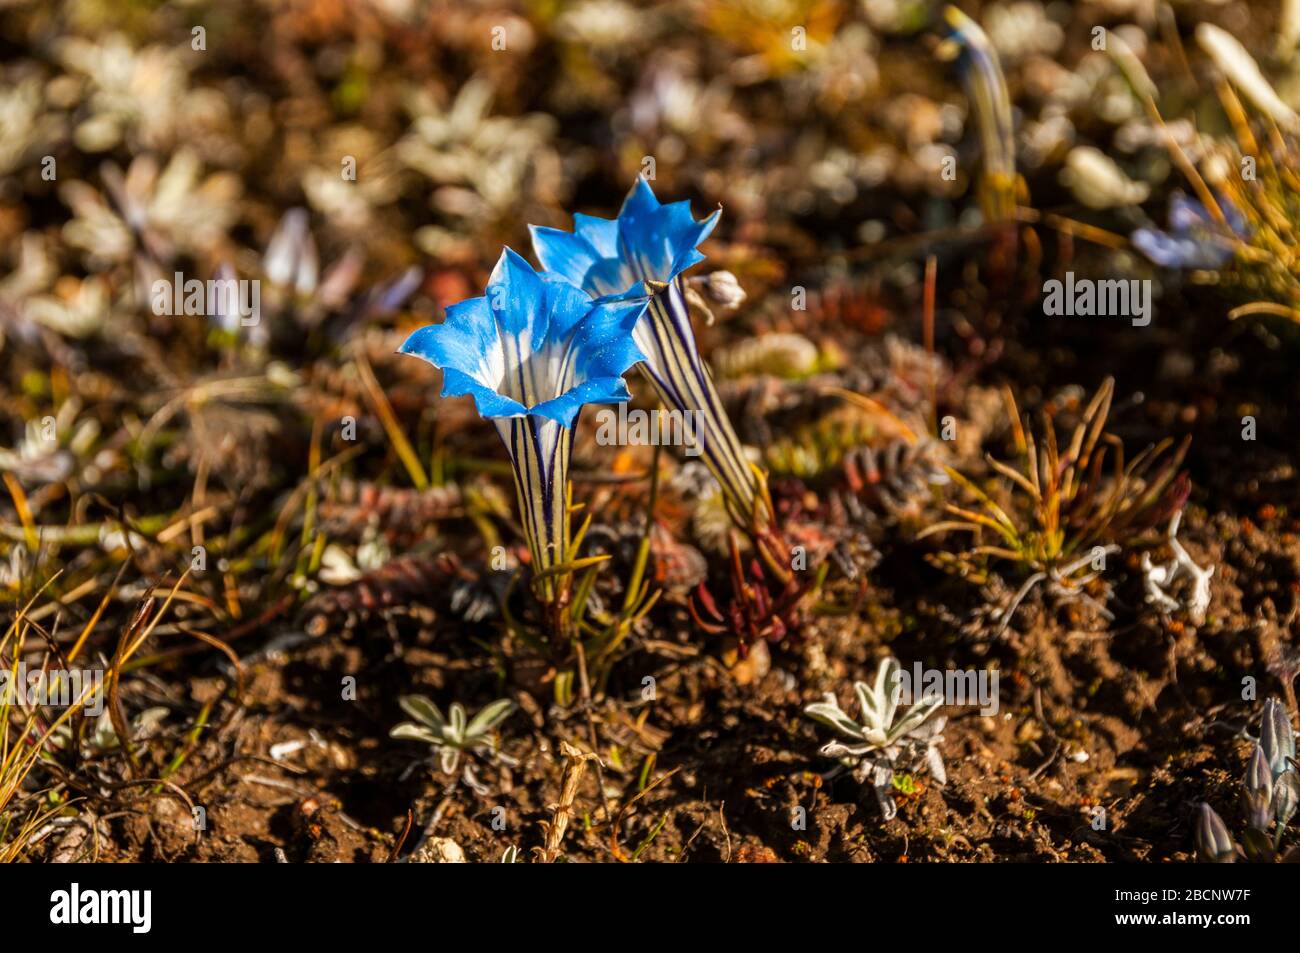 A high altitude flower of the gentiana family possibly gentiana crassuloides taken at around 4,000m high near Kangding Airport, Sichuan, China. Stock Photo